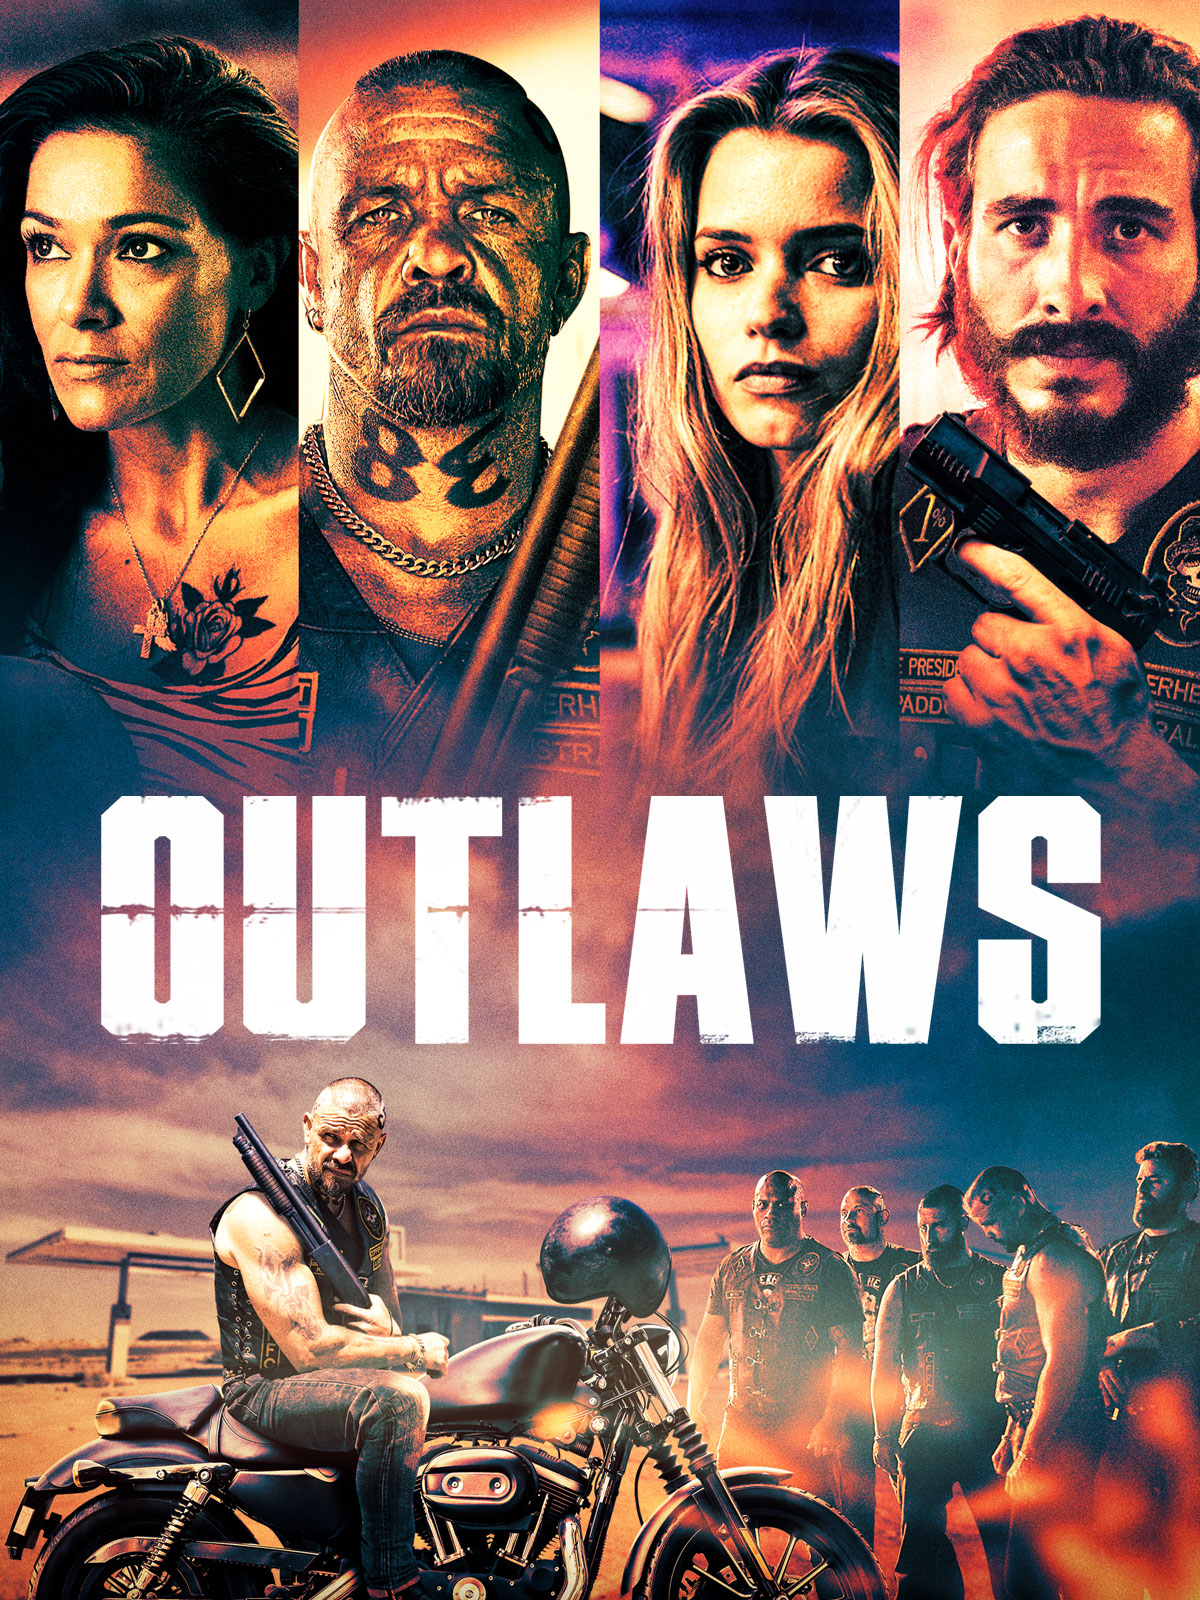 the outlaws movie review guardian